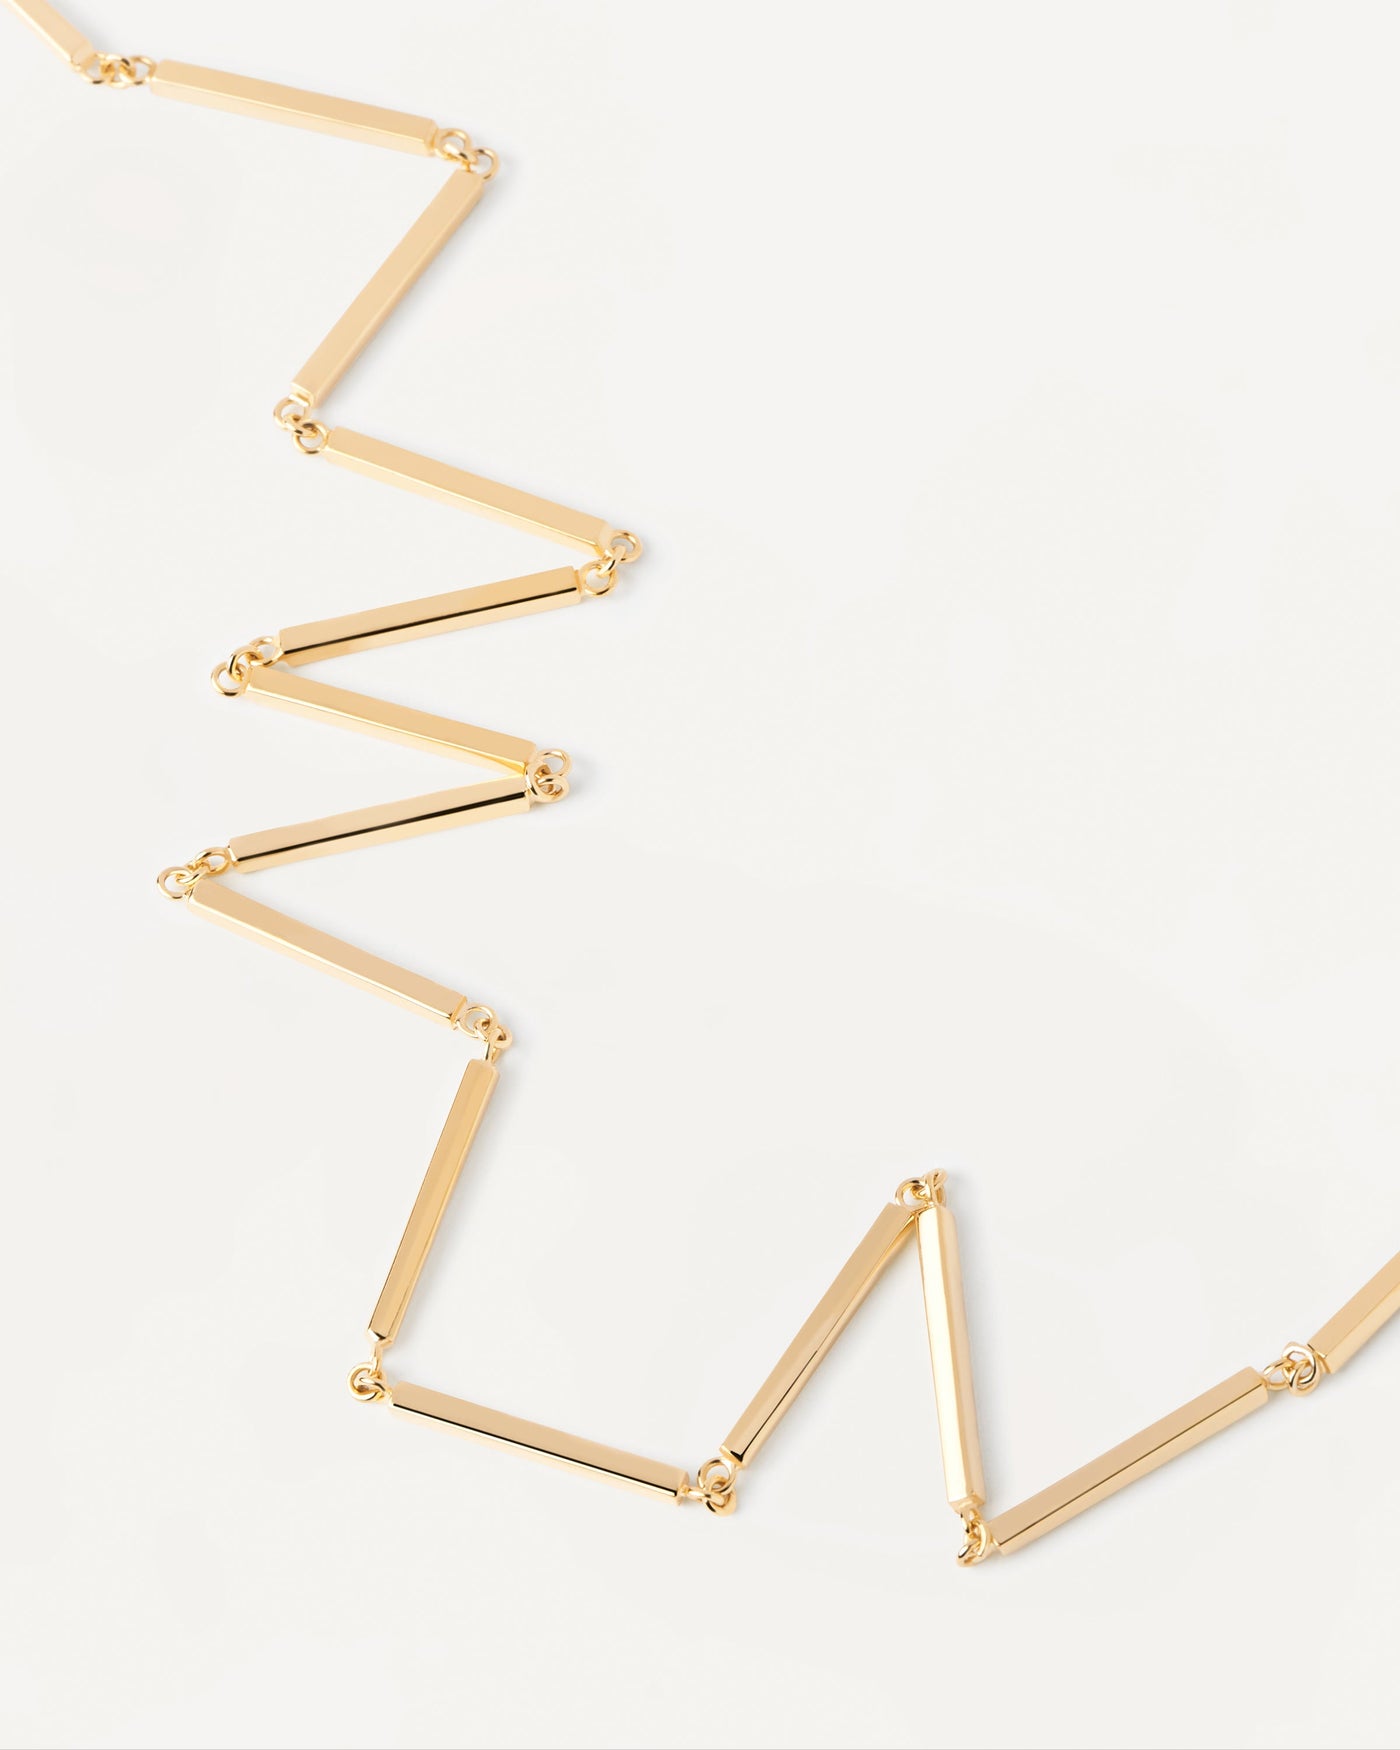 2023 Selection | Bar Chain Necklace. Articulated bar-chain necklace in plain gold-plated silver. Get the latest arrival from PDPAOLA. Place your order safely and get this Best Seller. Free Shipping.